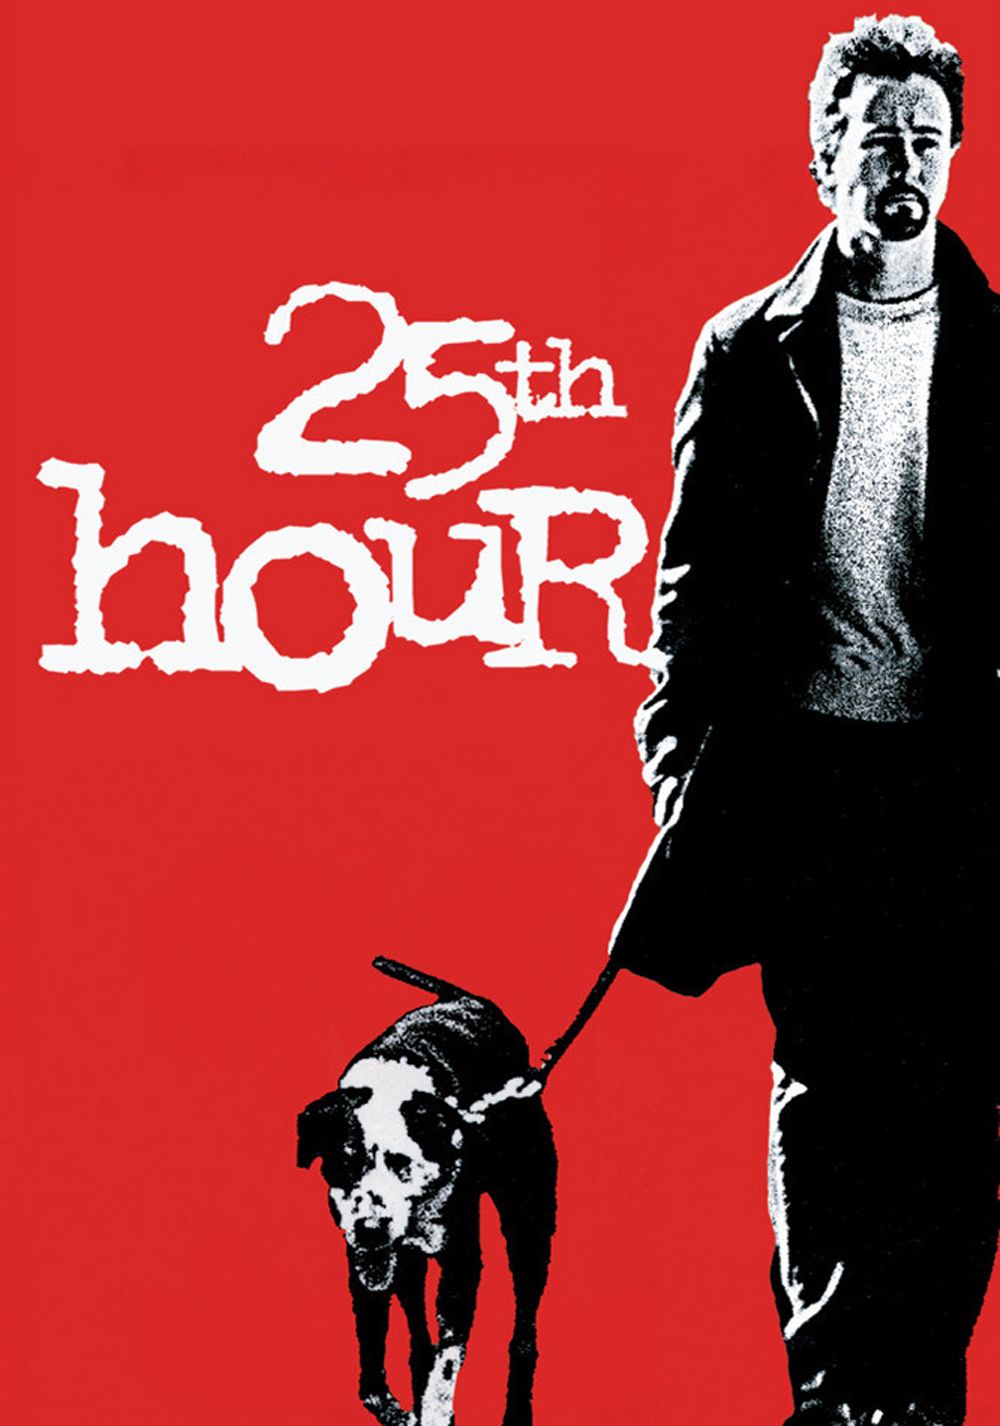 25th Hour Film Poster